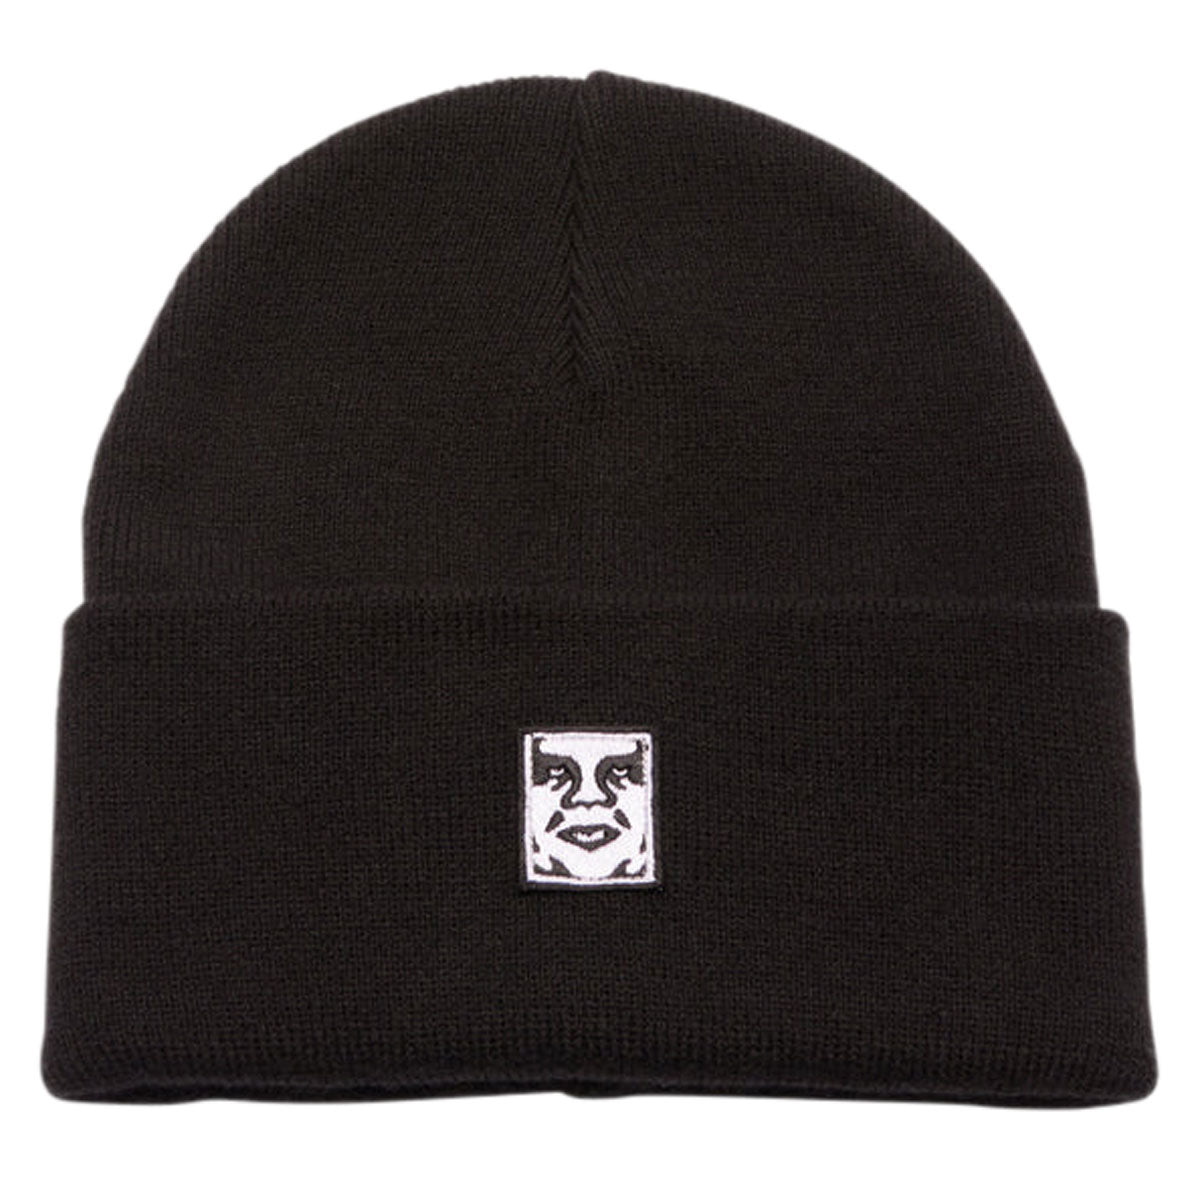 Obey Icon Patch Cuff Beanie - Black image 1